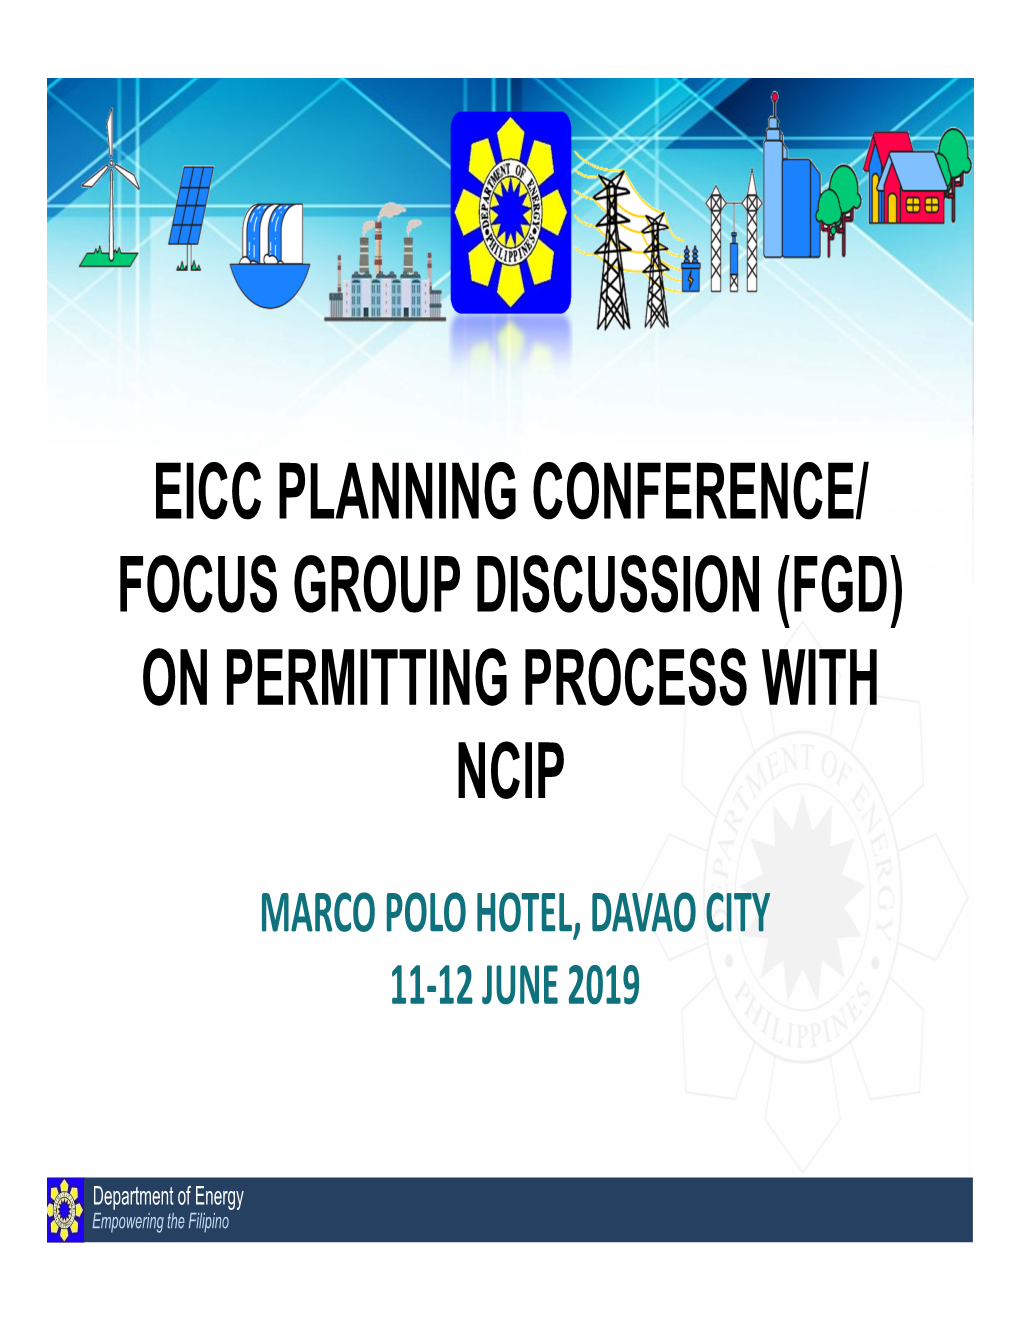 Eicc Planning Conference/ Focus Group Discussion (Fgd) on Permitting Process with Ncip